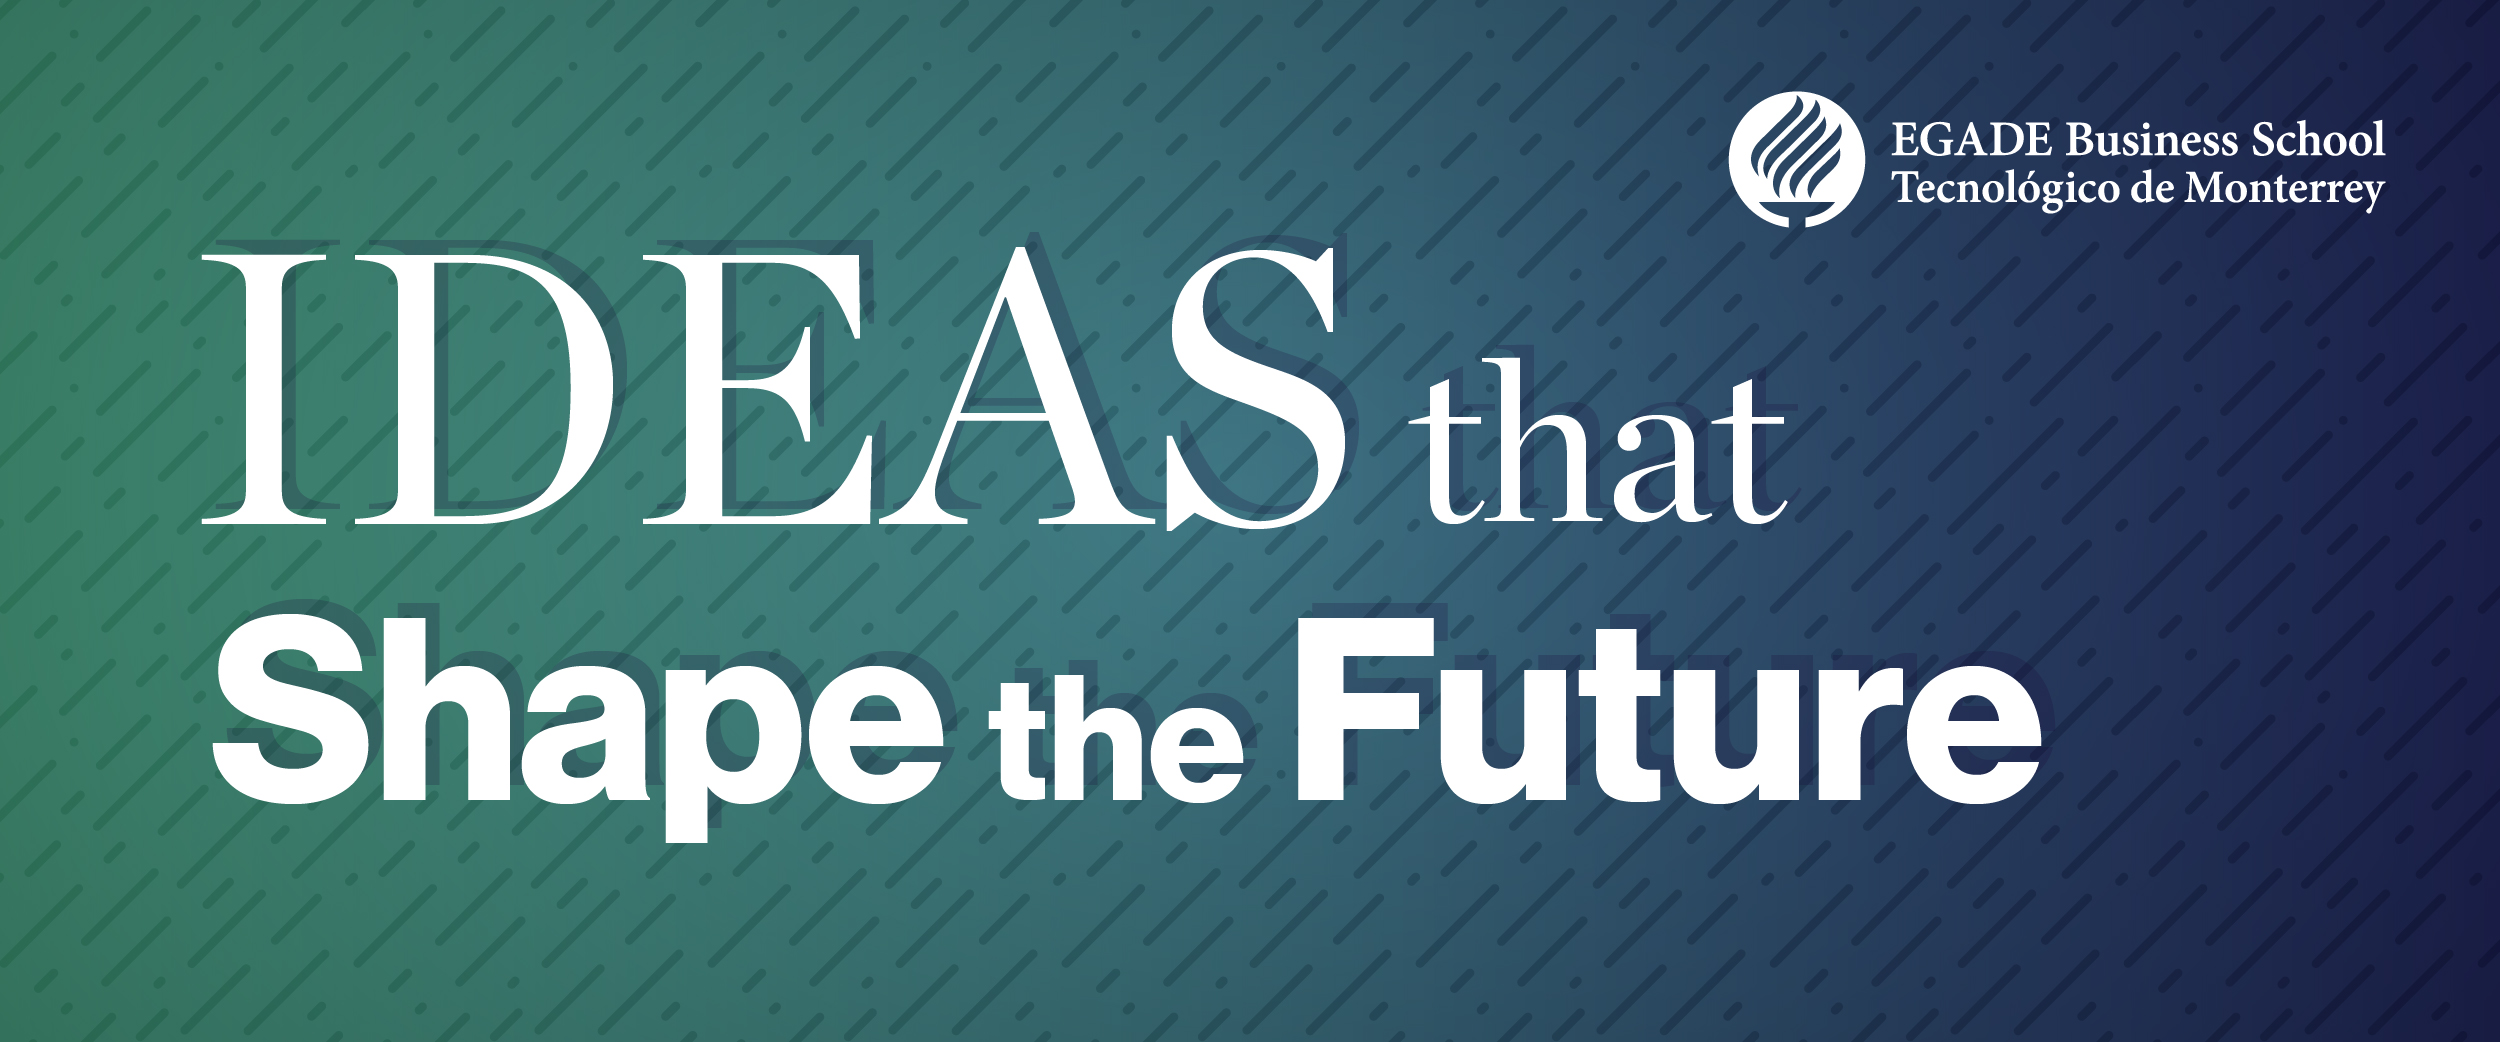 Banner_Ideas_to_Lead_The_Future-FINAL-01